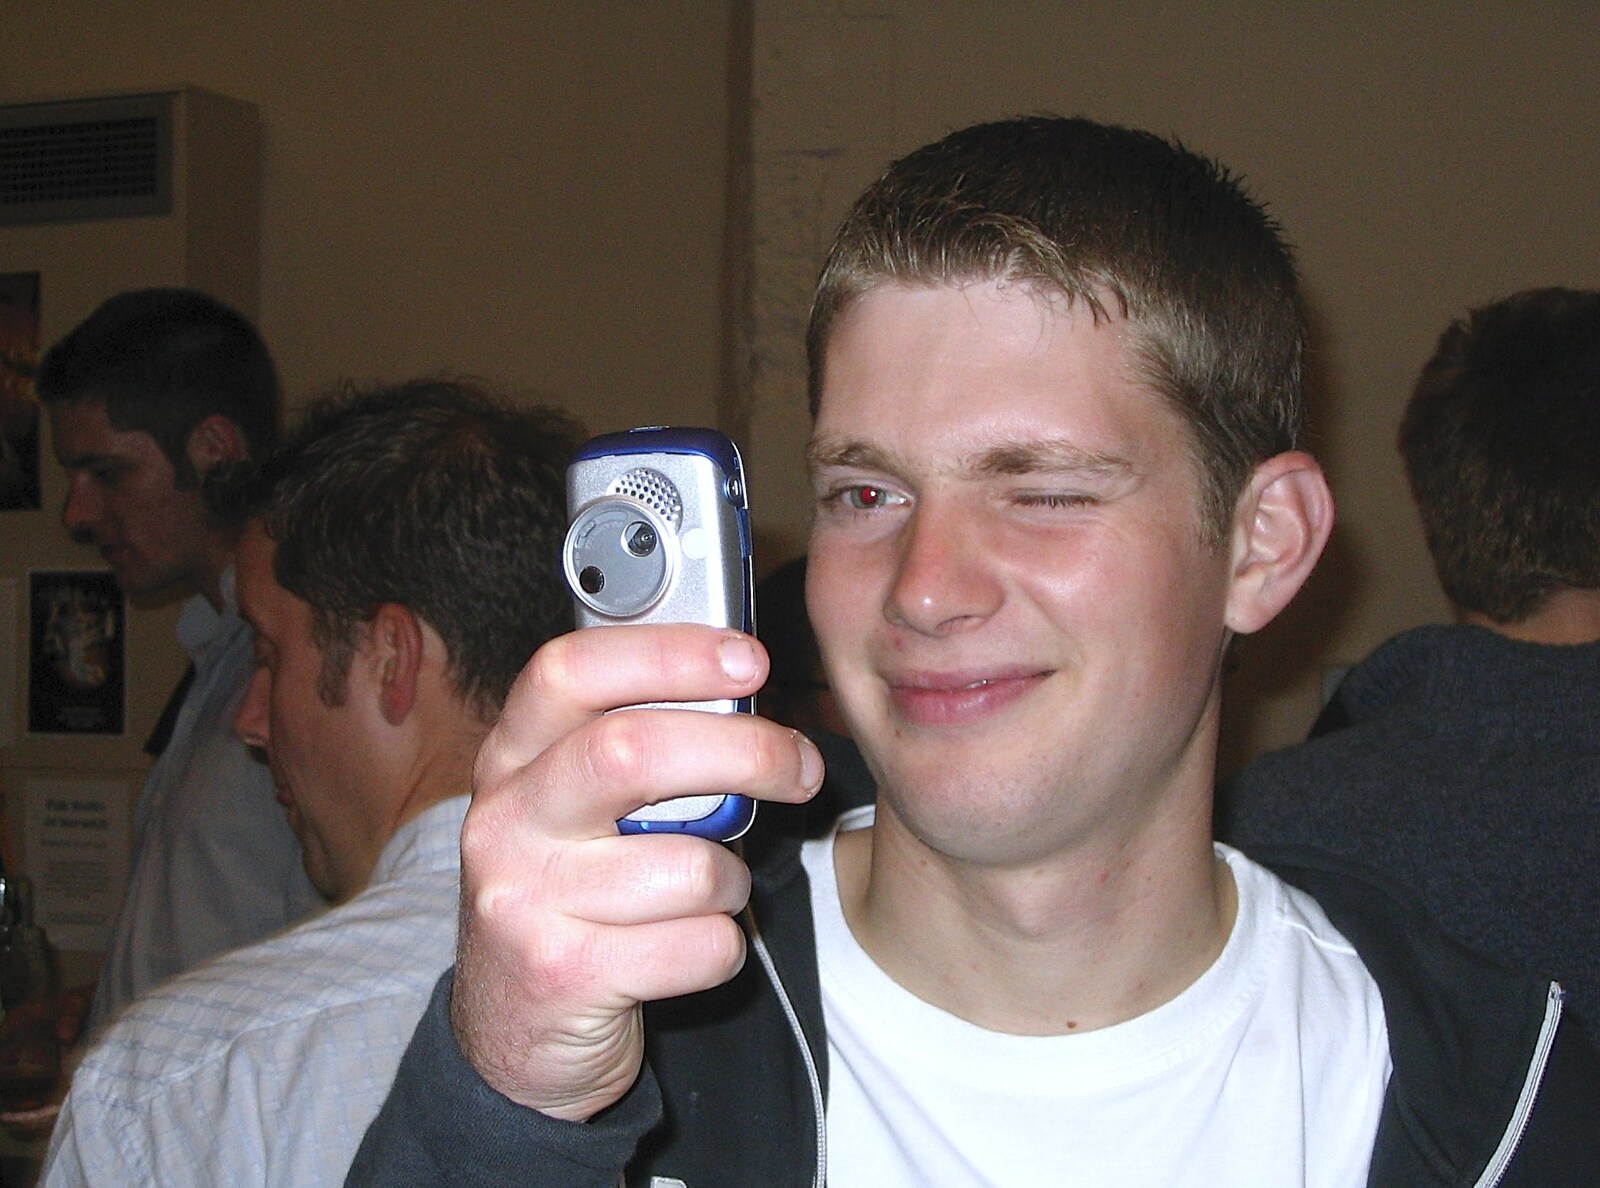 The Boy Phil takes a photo from The Norfolk and Norwich Beer Festival, St. Andrew's Hall, Norwich - 27th October 2004